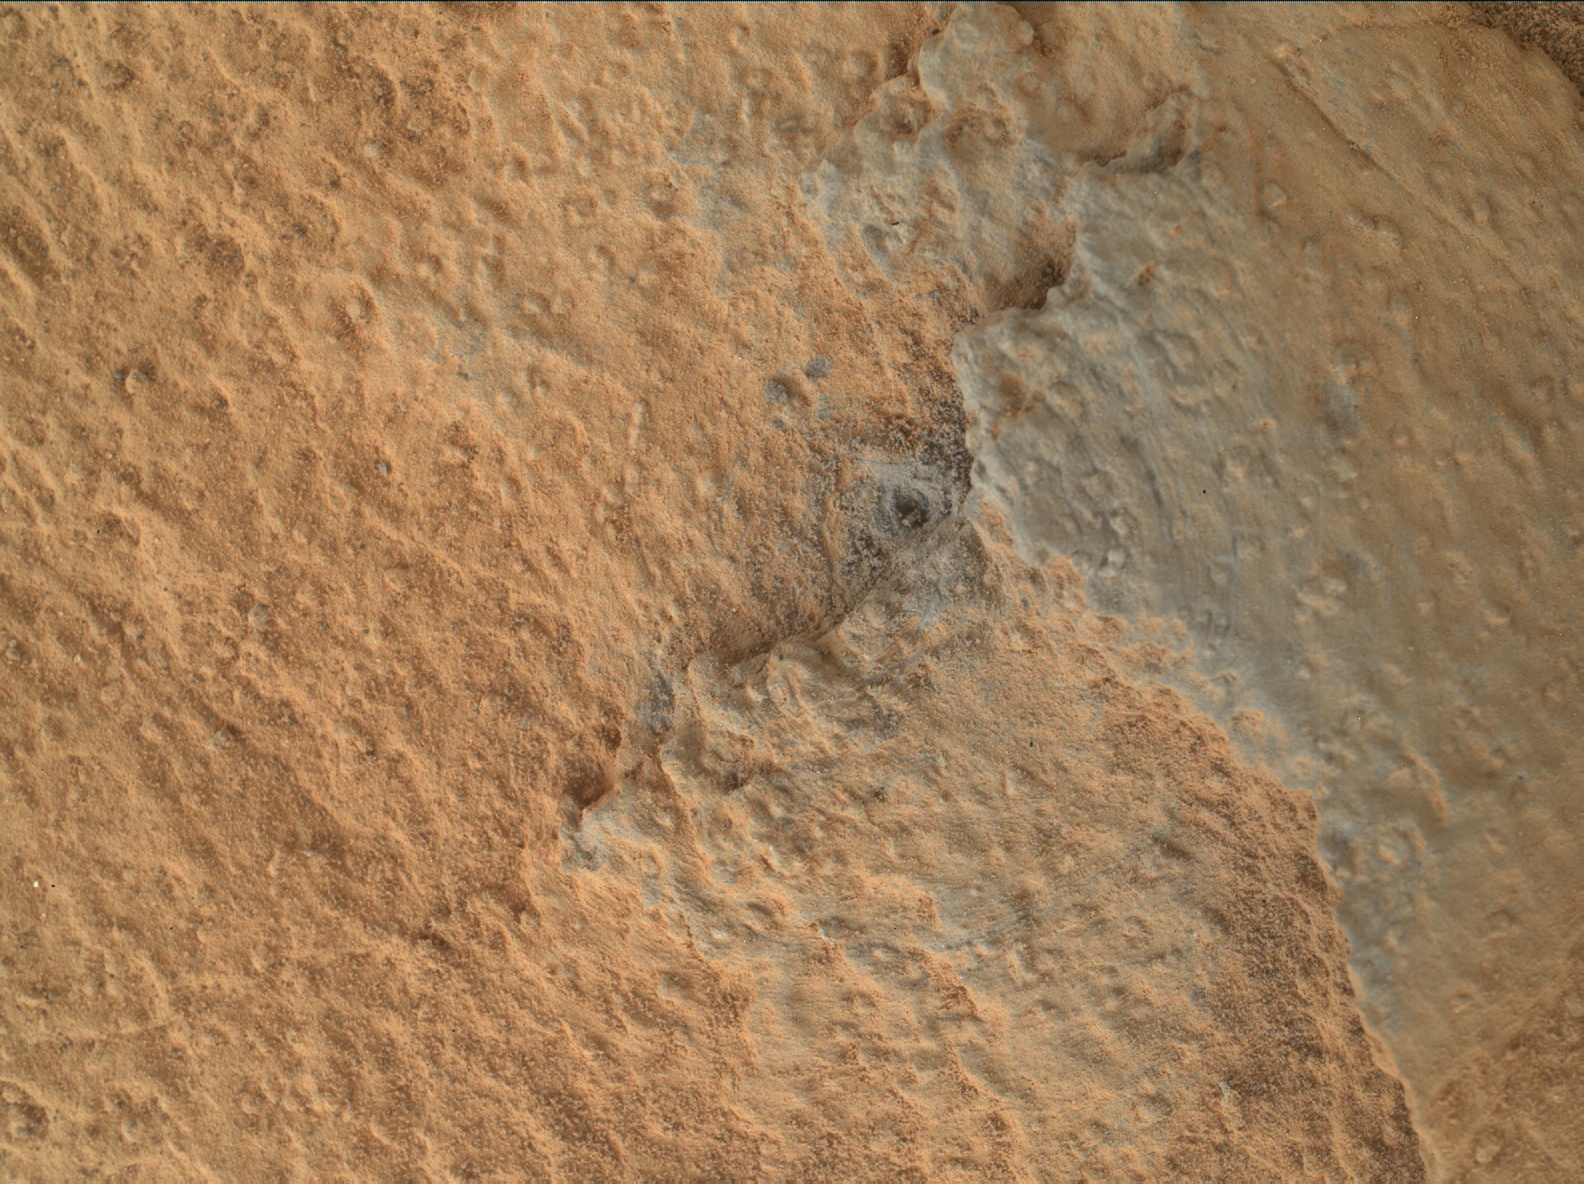 Nasa's Mars rover Curiosity acquired this image using its Mars Hand Lens Imager (MAHLI) on Sol 936